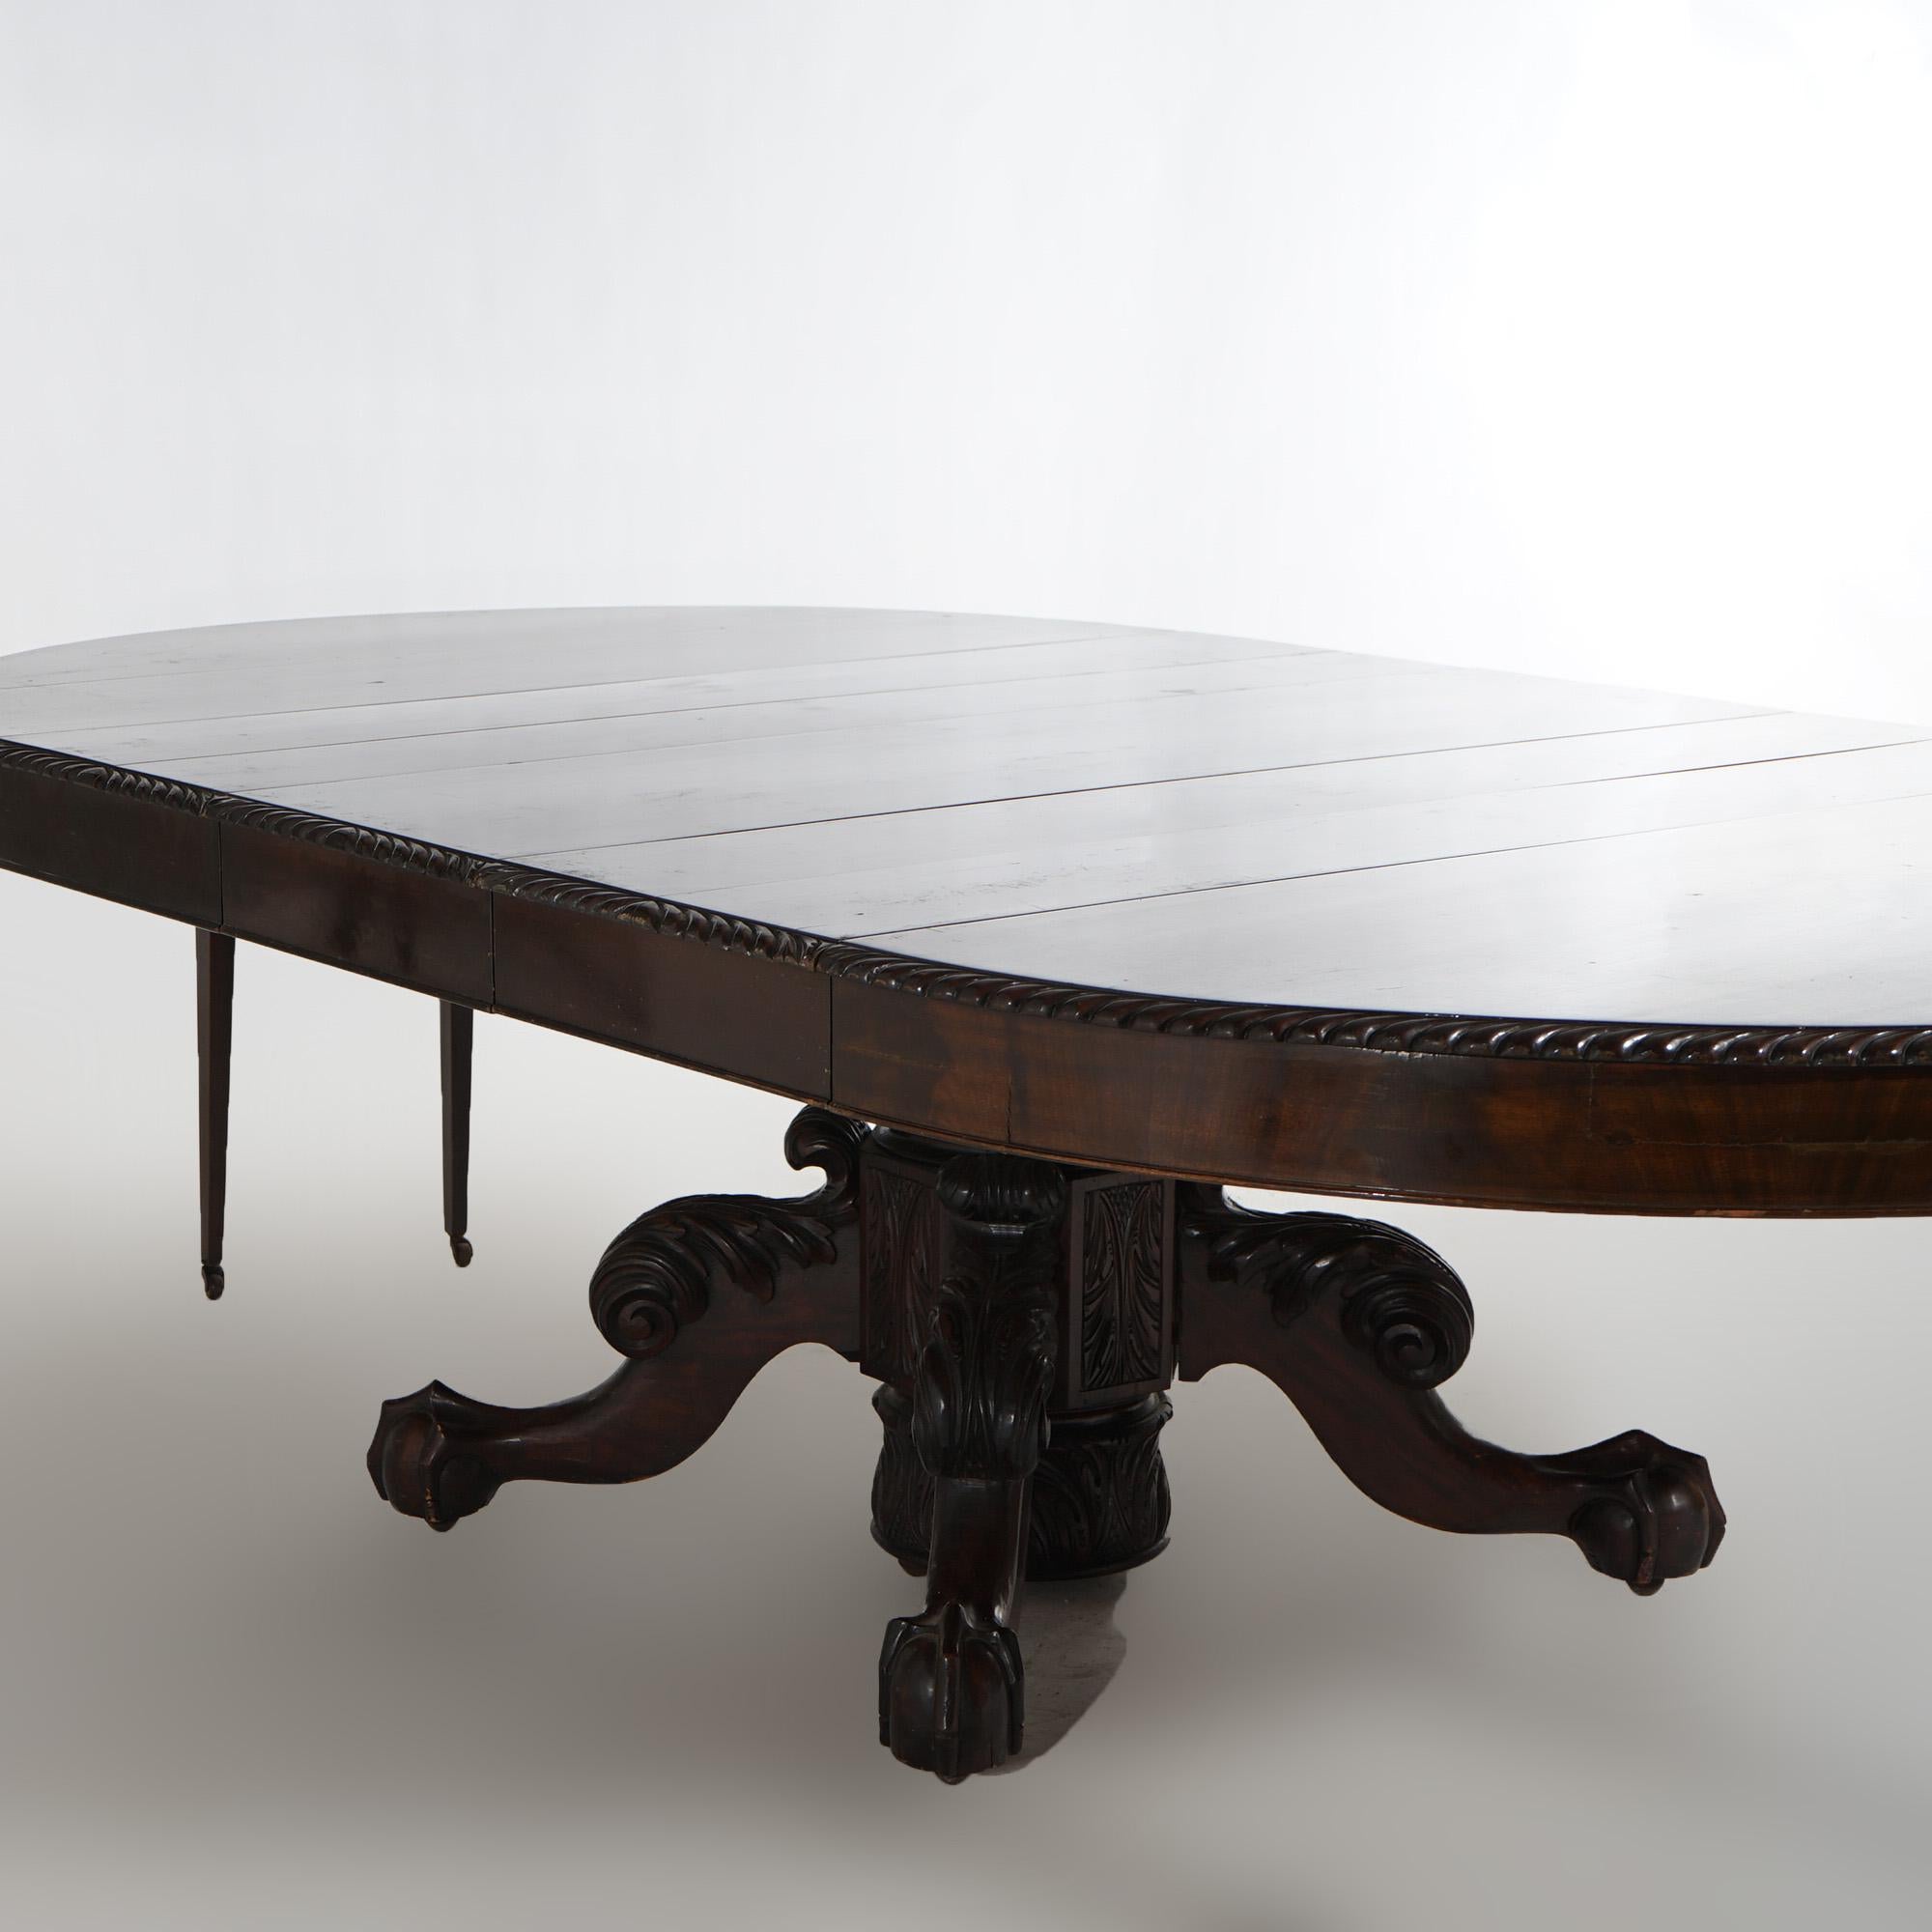 Antique Neoclassical Empire Carved Flame Mahogany 60” Dining Table & Four Leaves For Sale 9